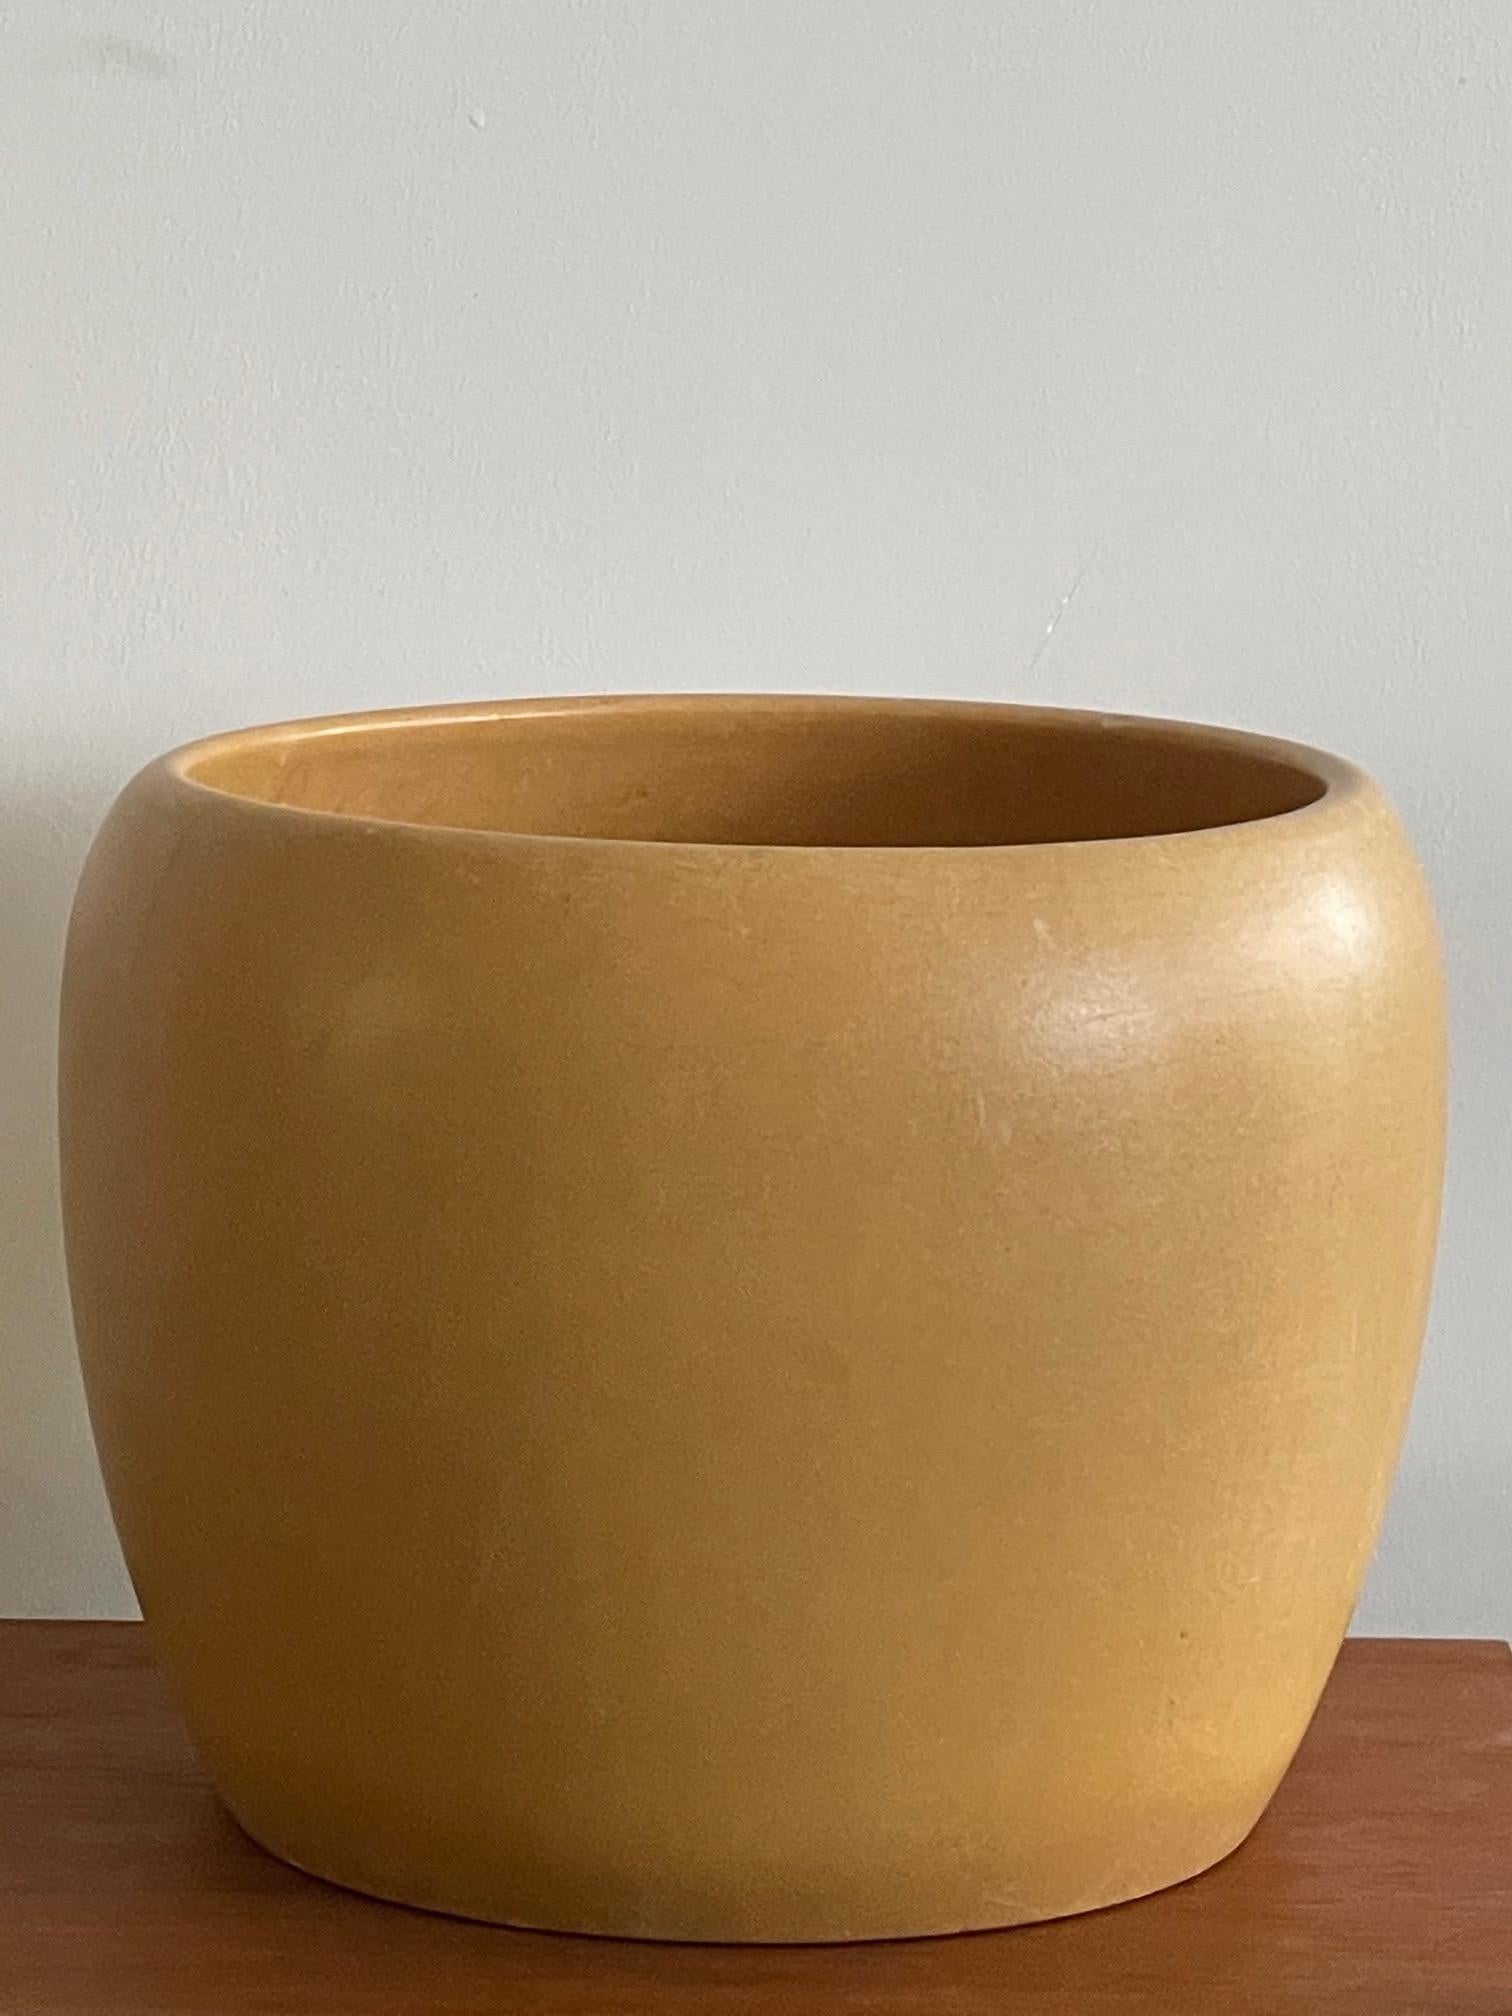 A large scale Gainey of California yellow ochre pot with drilled holes on bottom. Measures 13